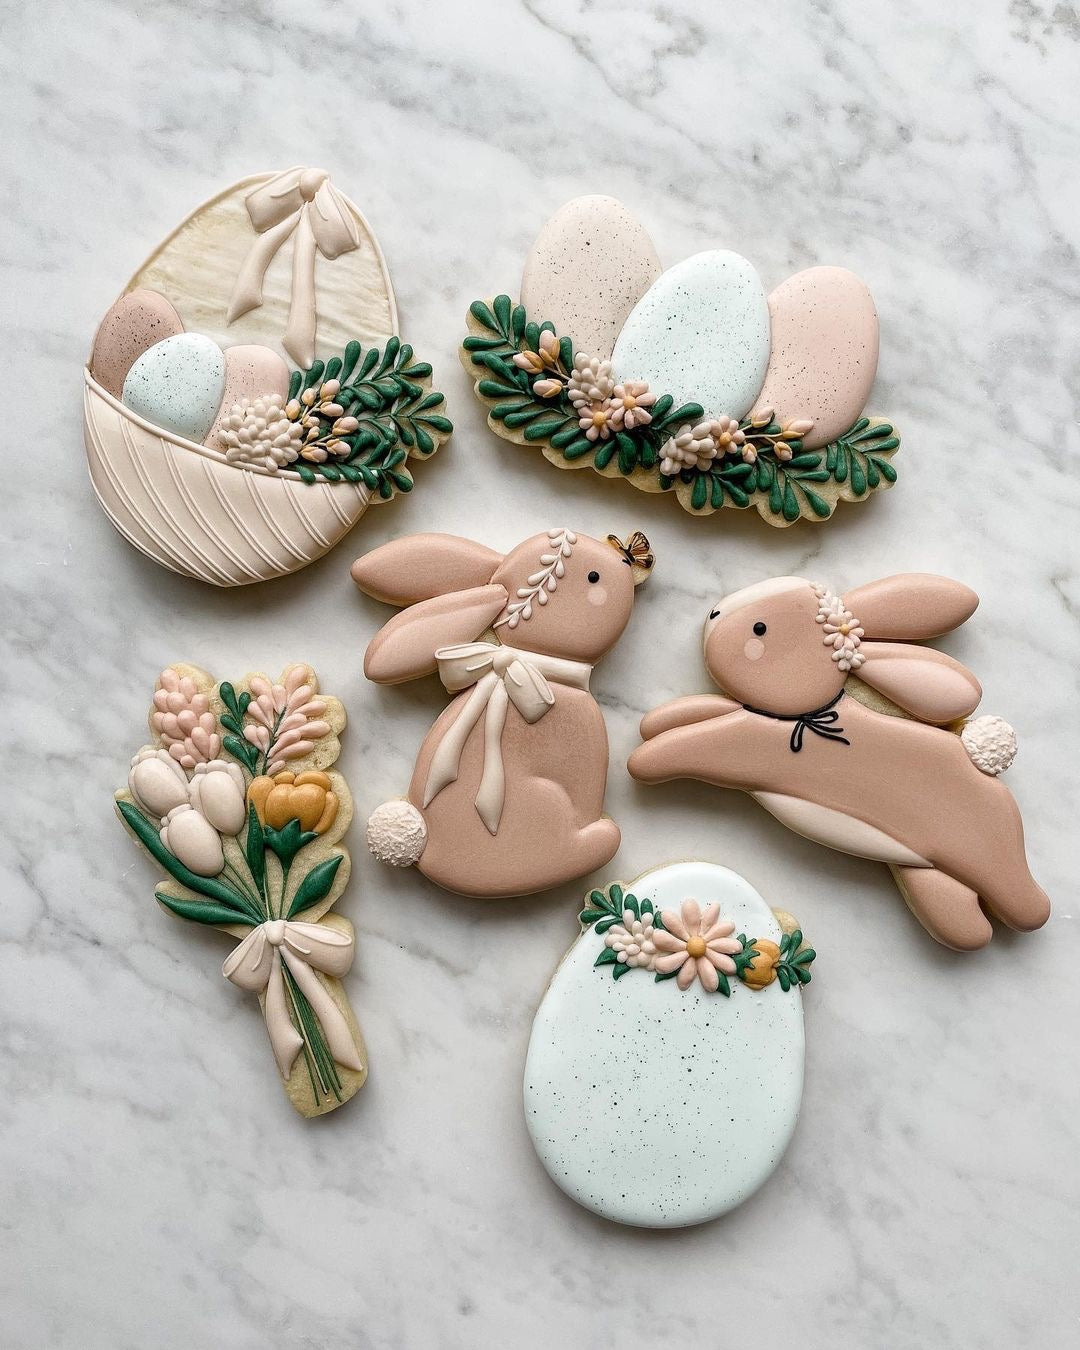 Easter by The Cookie Gallery